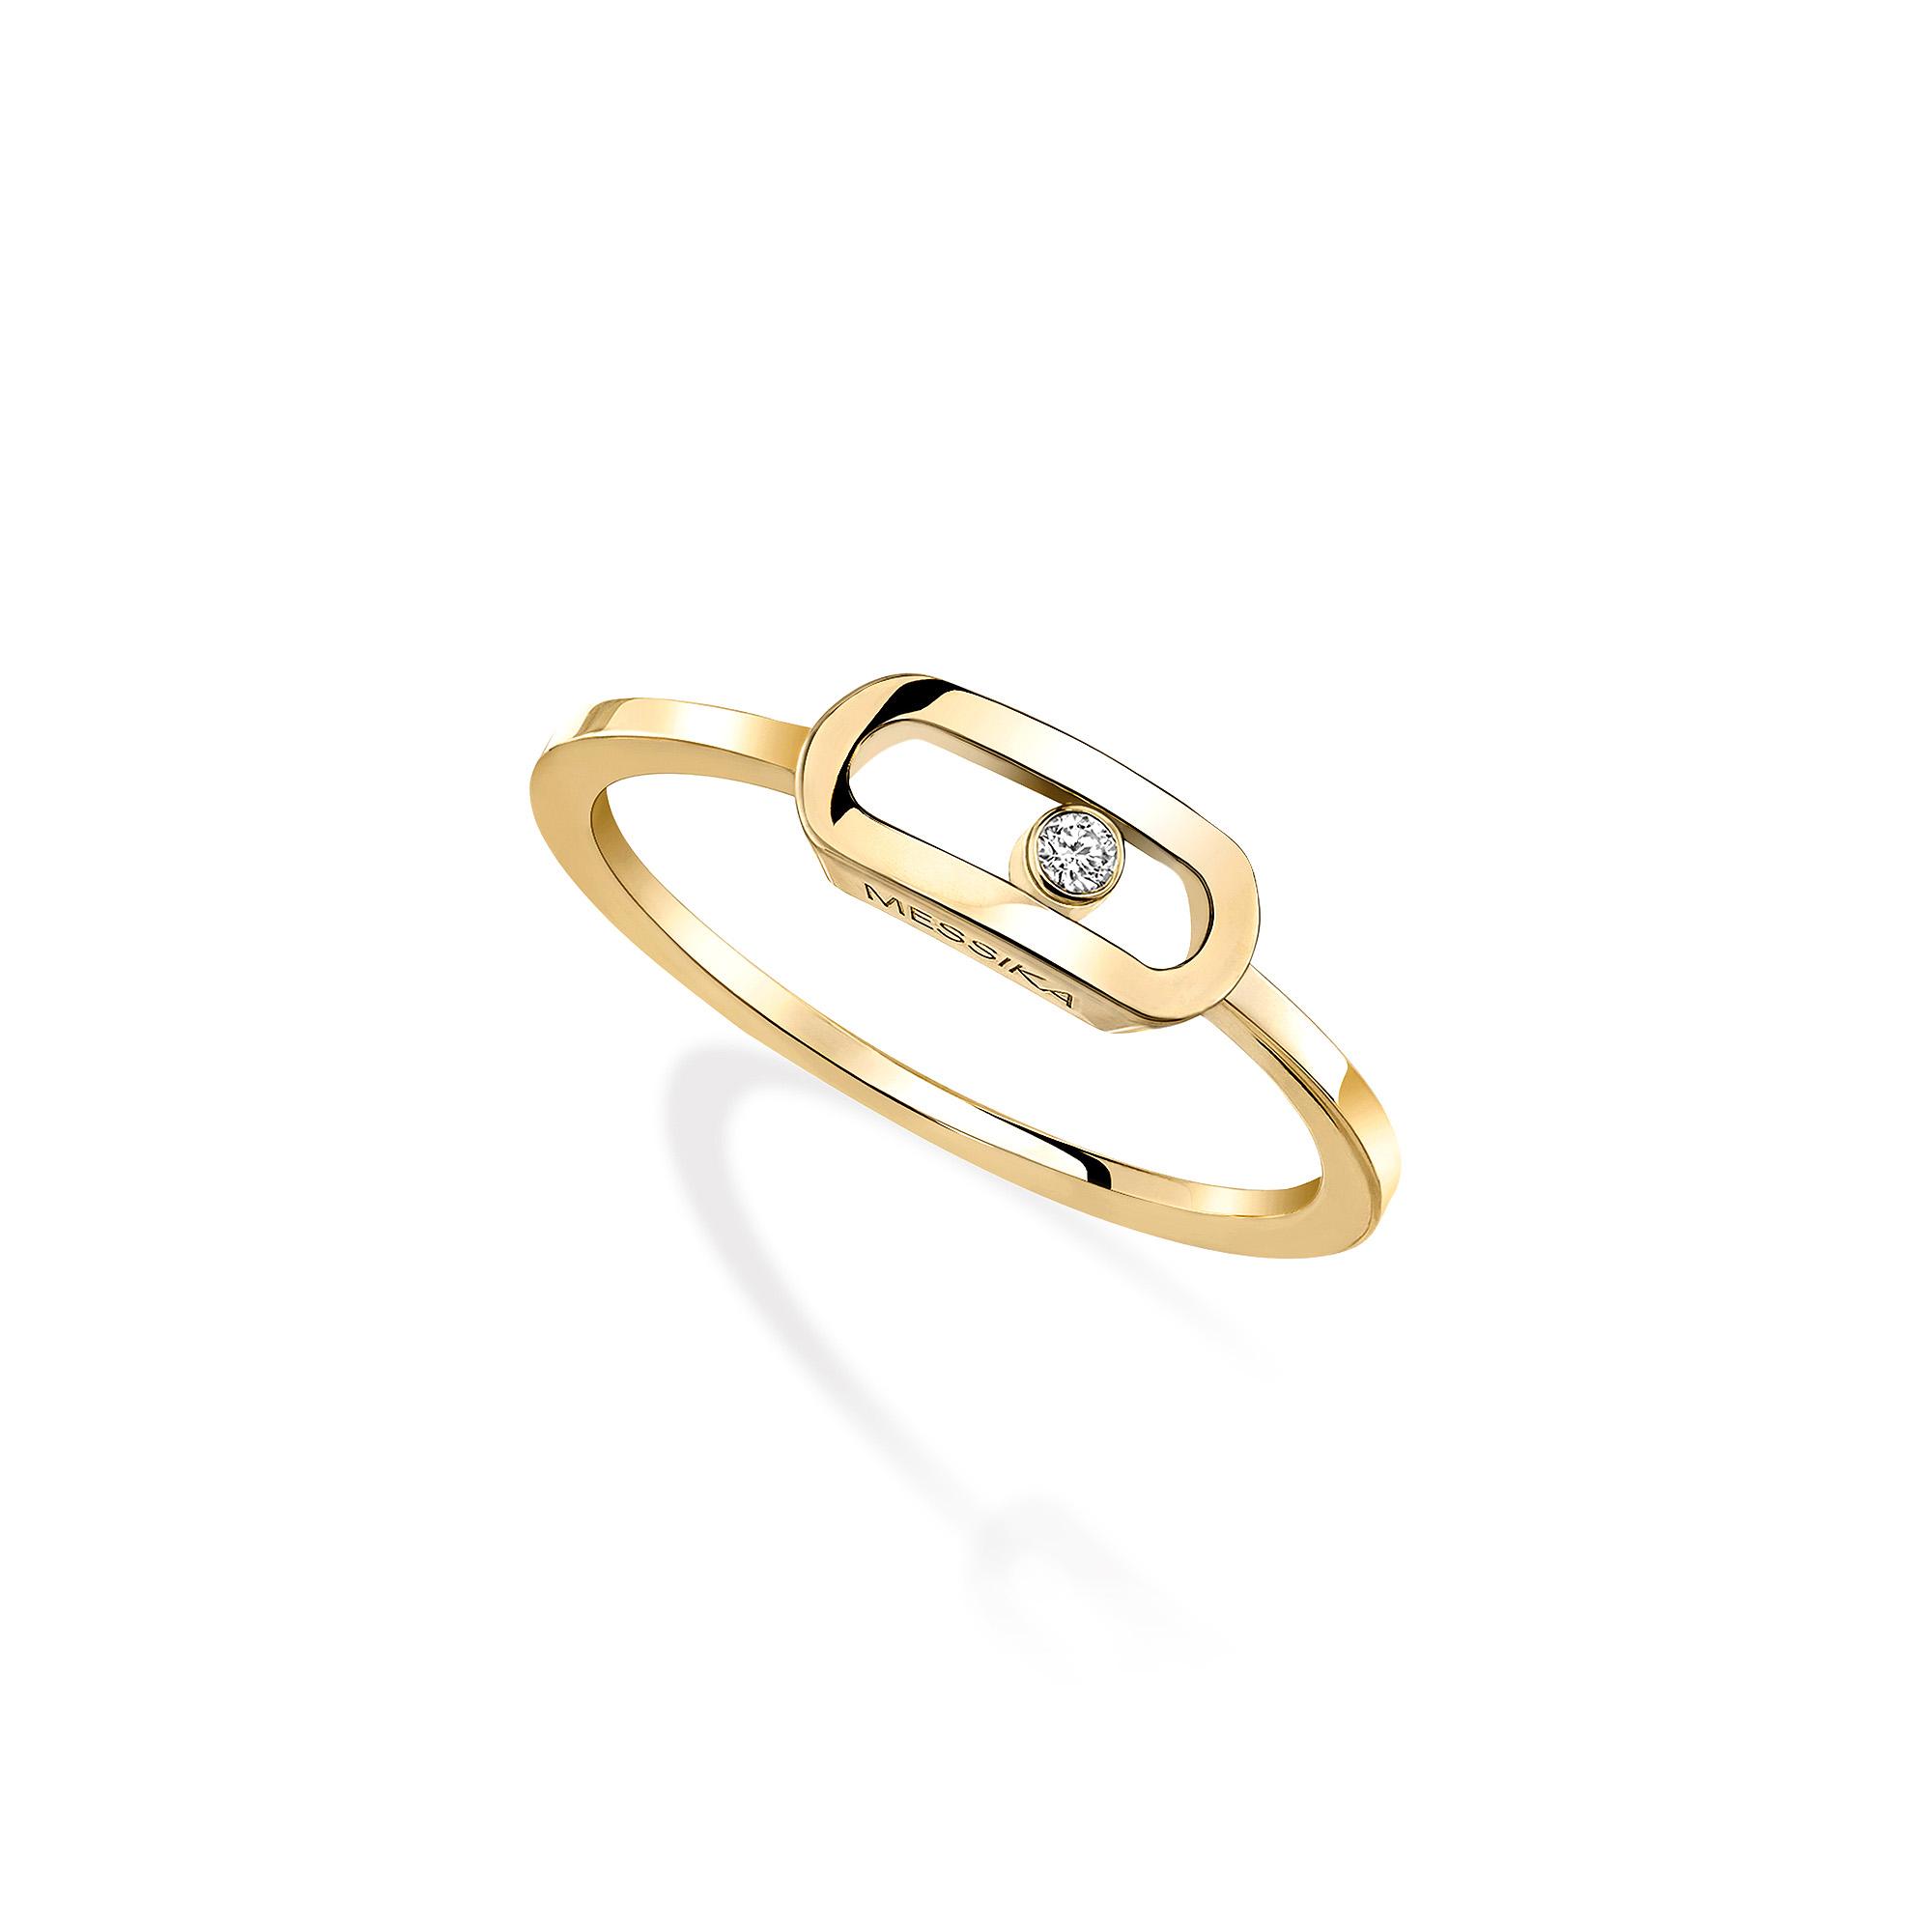 Messika Move Uno Gold Ring (Ref: 10055-YG)